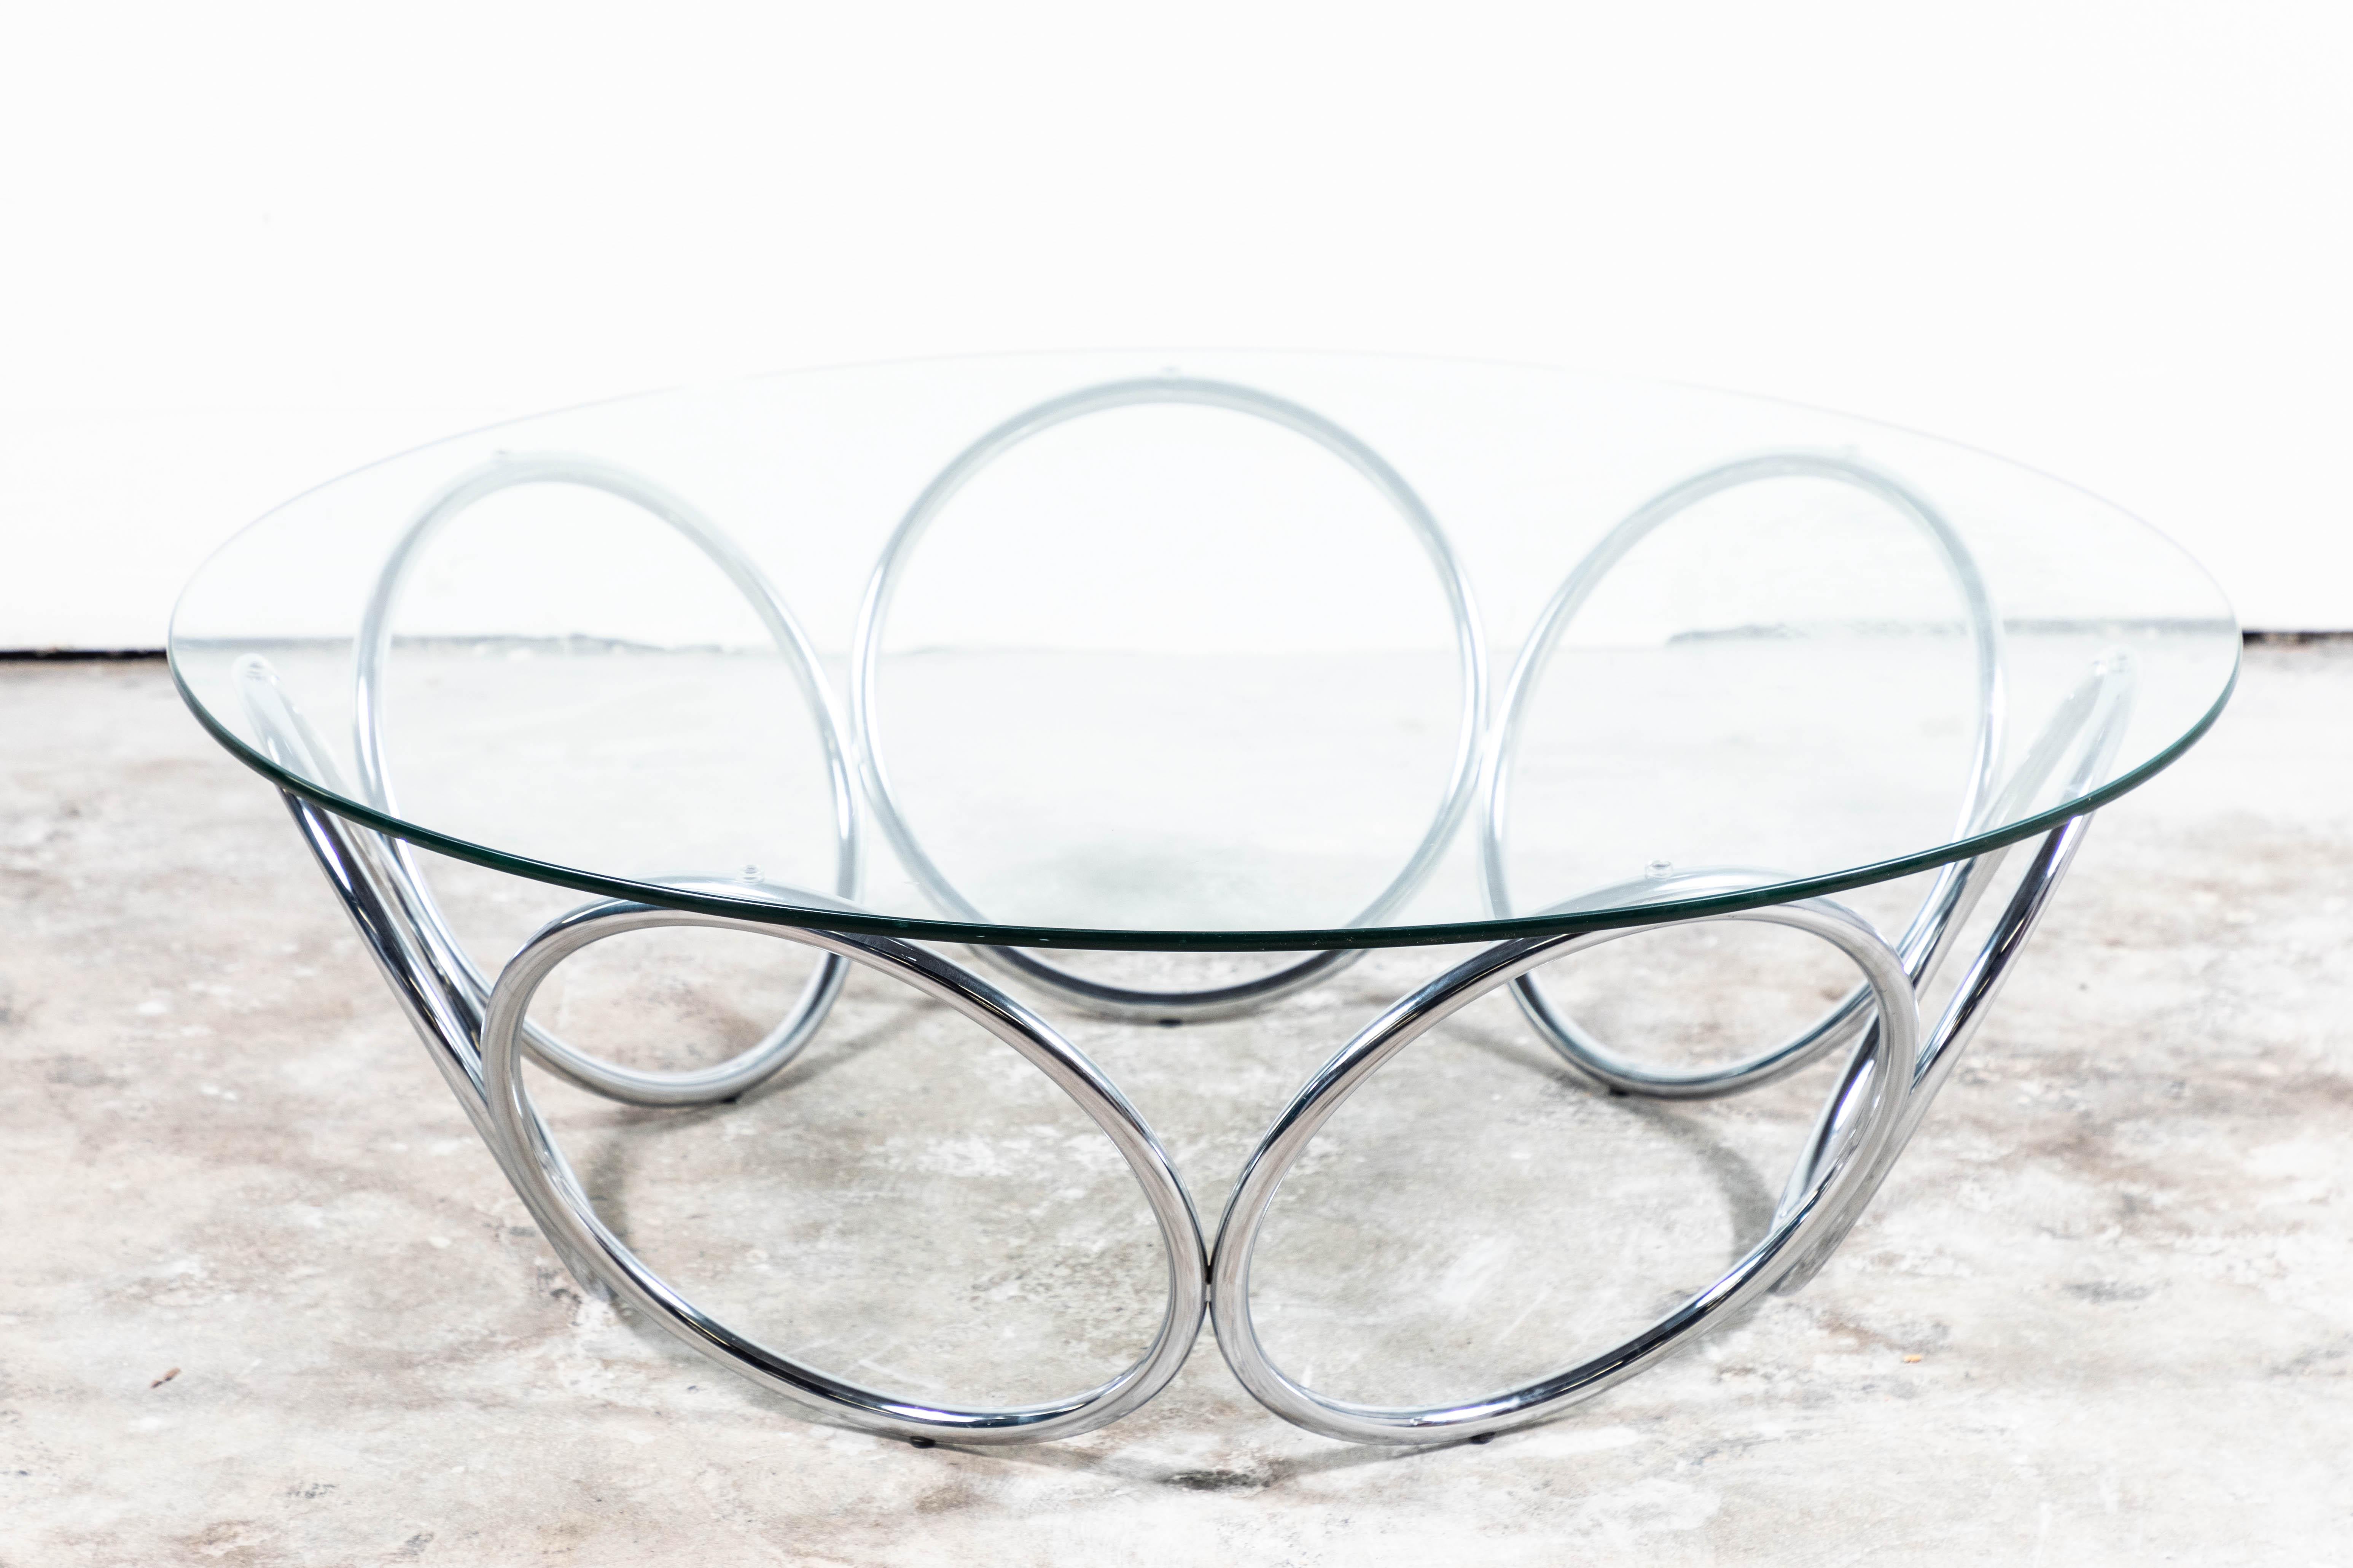 If you love big chrome rings, then this is the table for you.
Great design. Clean lines. Vintage, 1970s
Maker unknown.